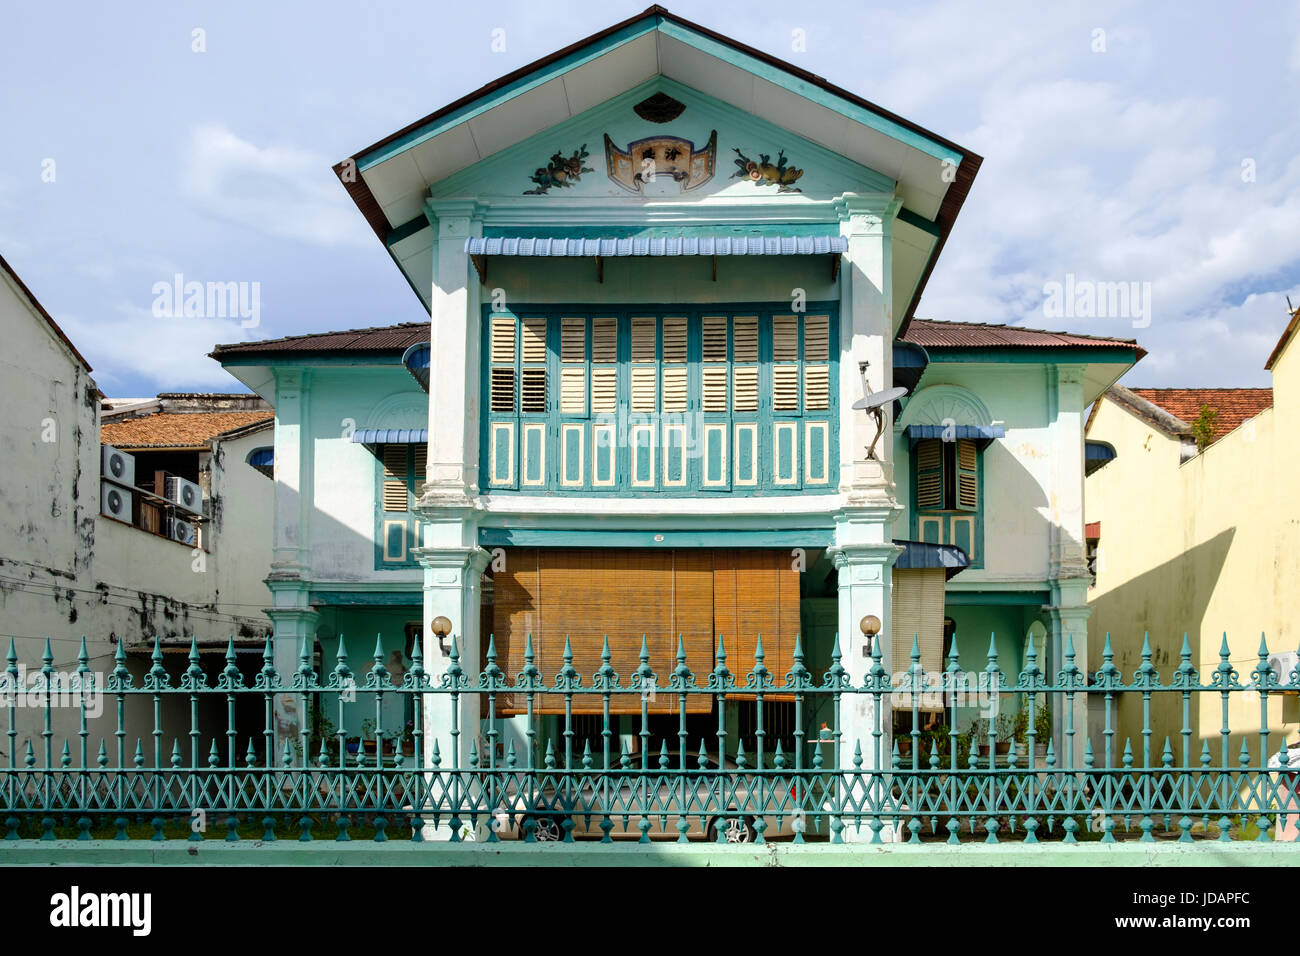 A typical, Peranakan (Straits Chinese) two-storey townhouse in George Town, Pulau Pinang (Penang), Malaysia. Stock Photo